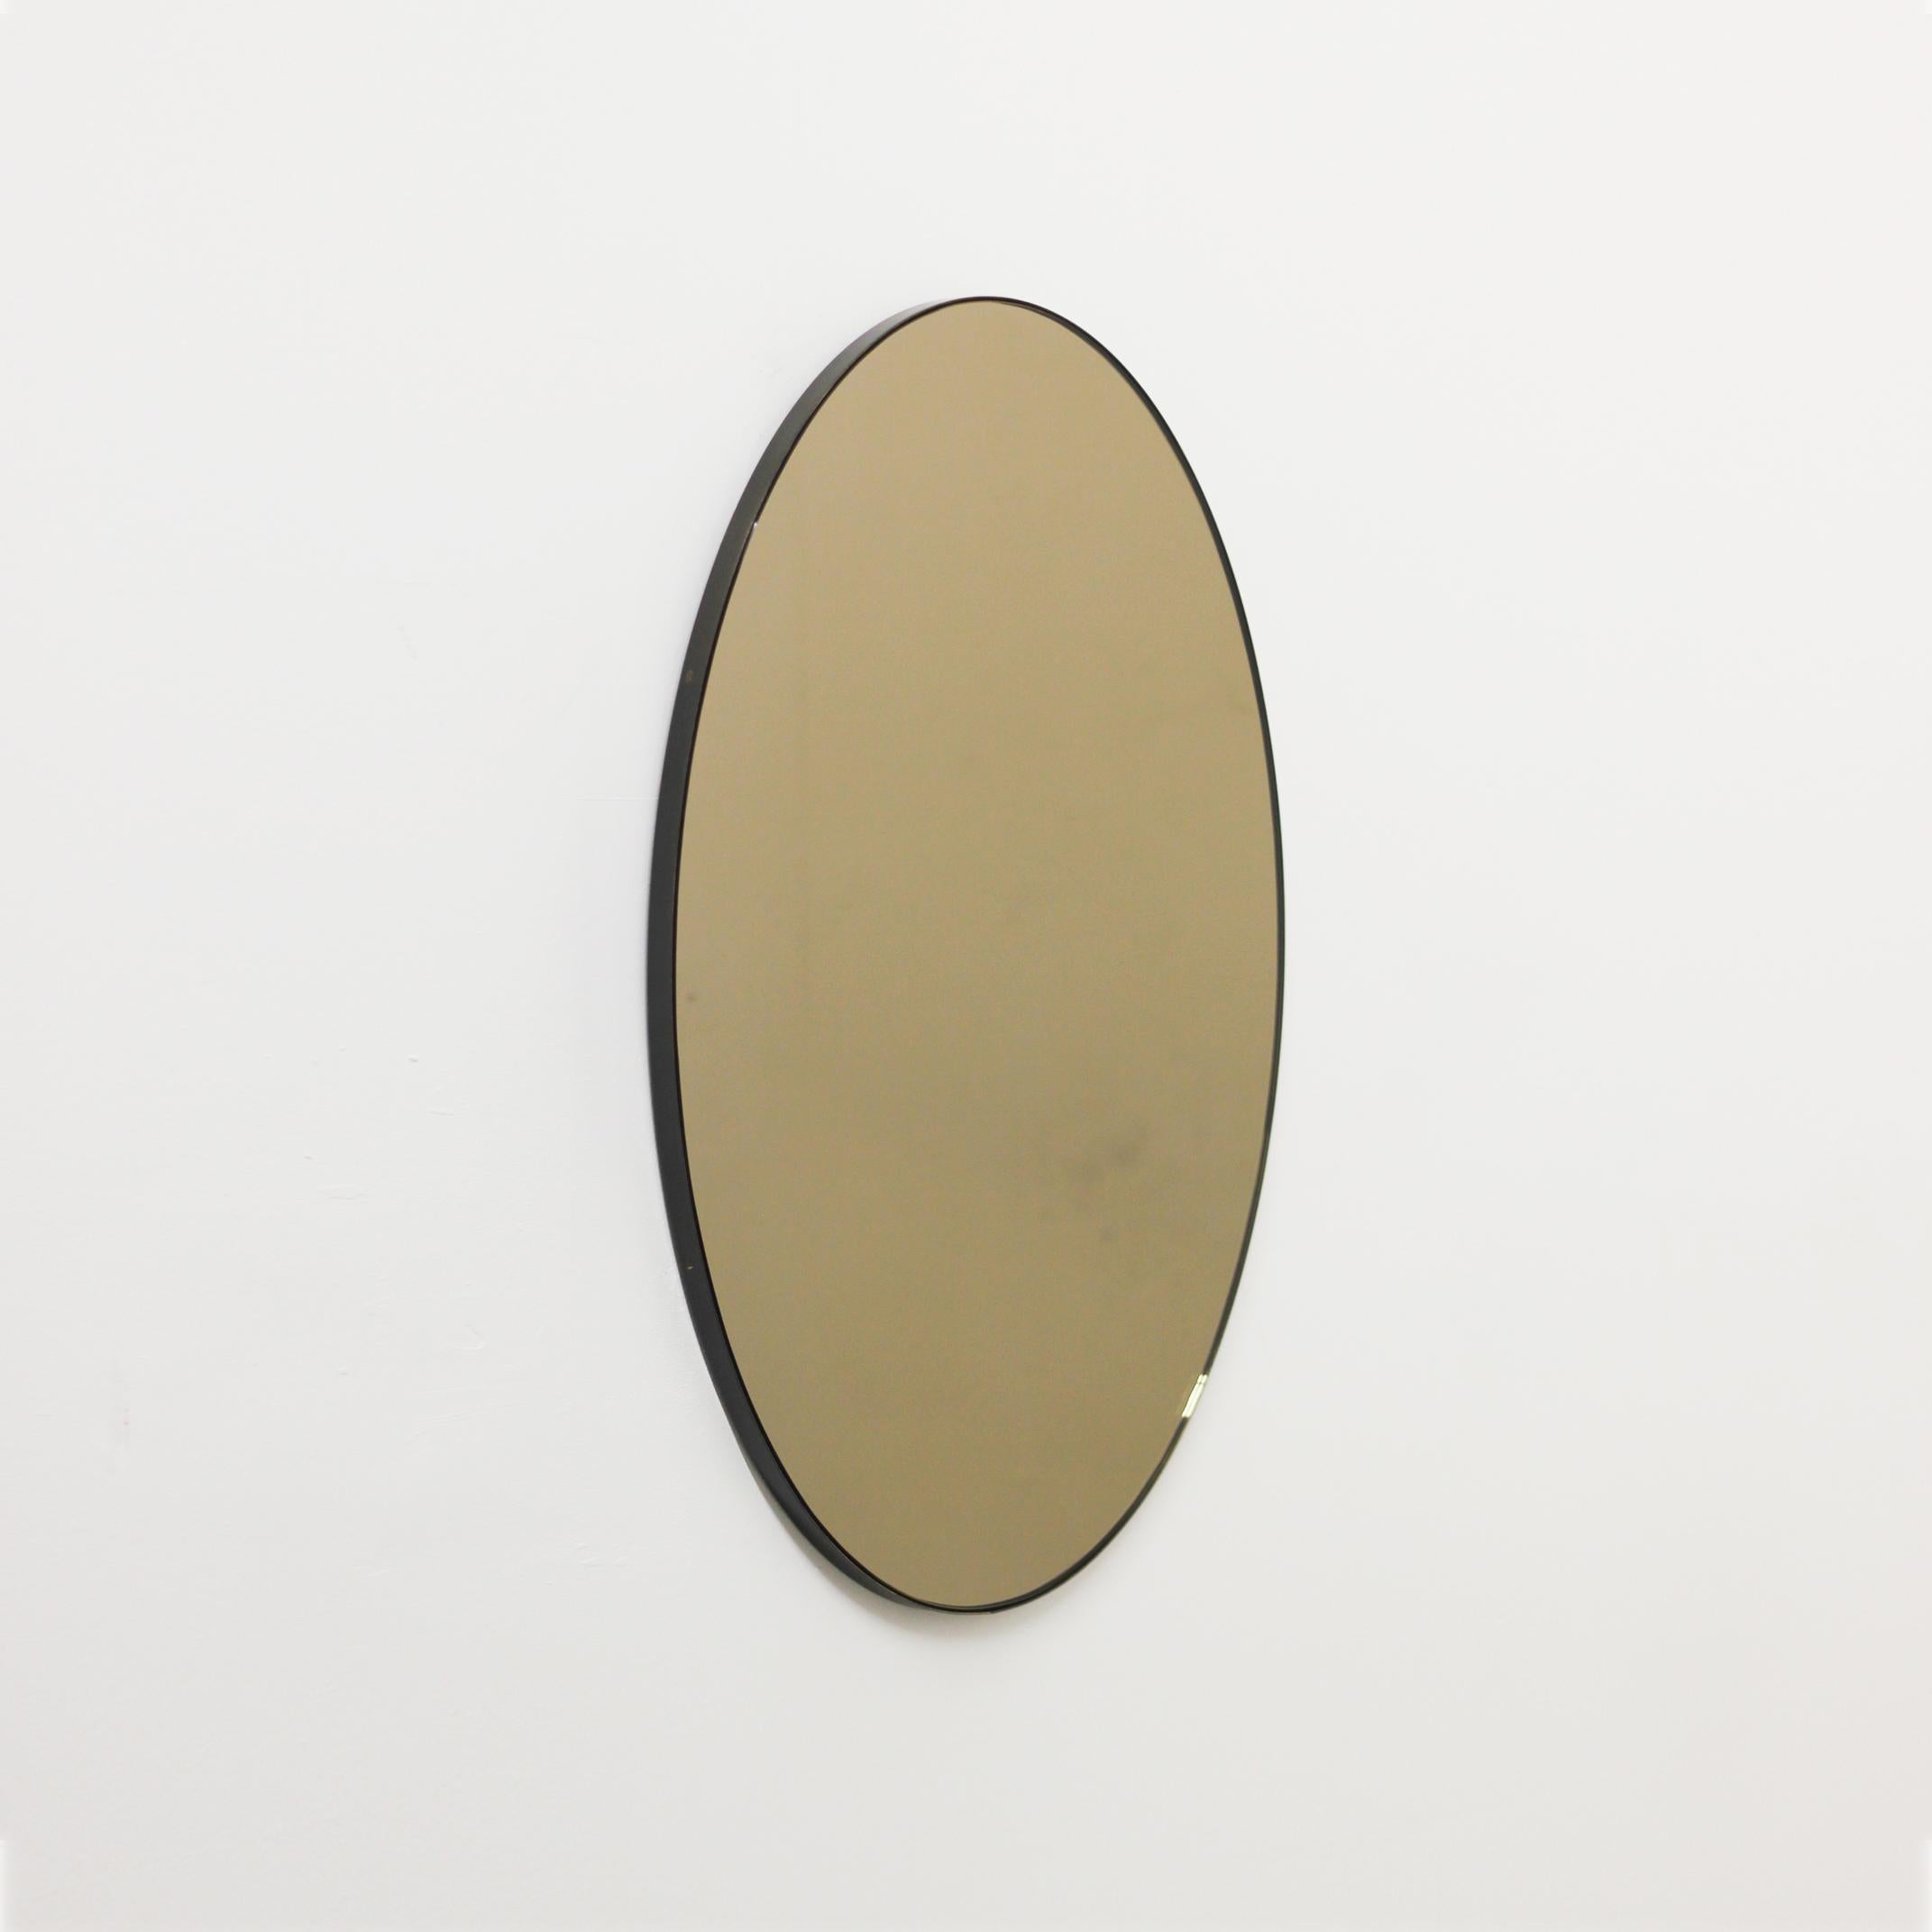 Contemporary oval bronze tinted mirror with an elegant bronze patina brass frame. Designed and handcrafted in London, UK.

This mirror is fully customisable. Shipped safely and fully insured worldwide.

Medium, large and extra-large (37cm x 56cm,